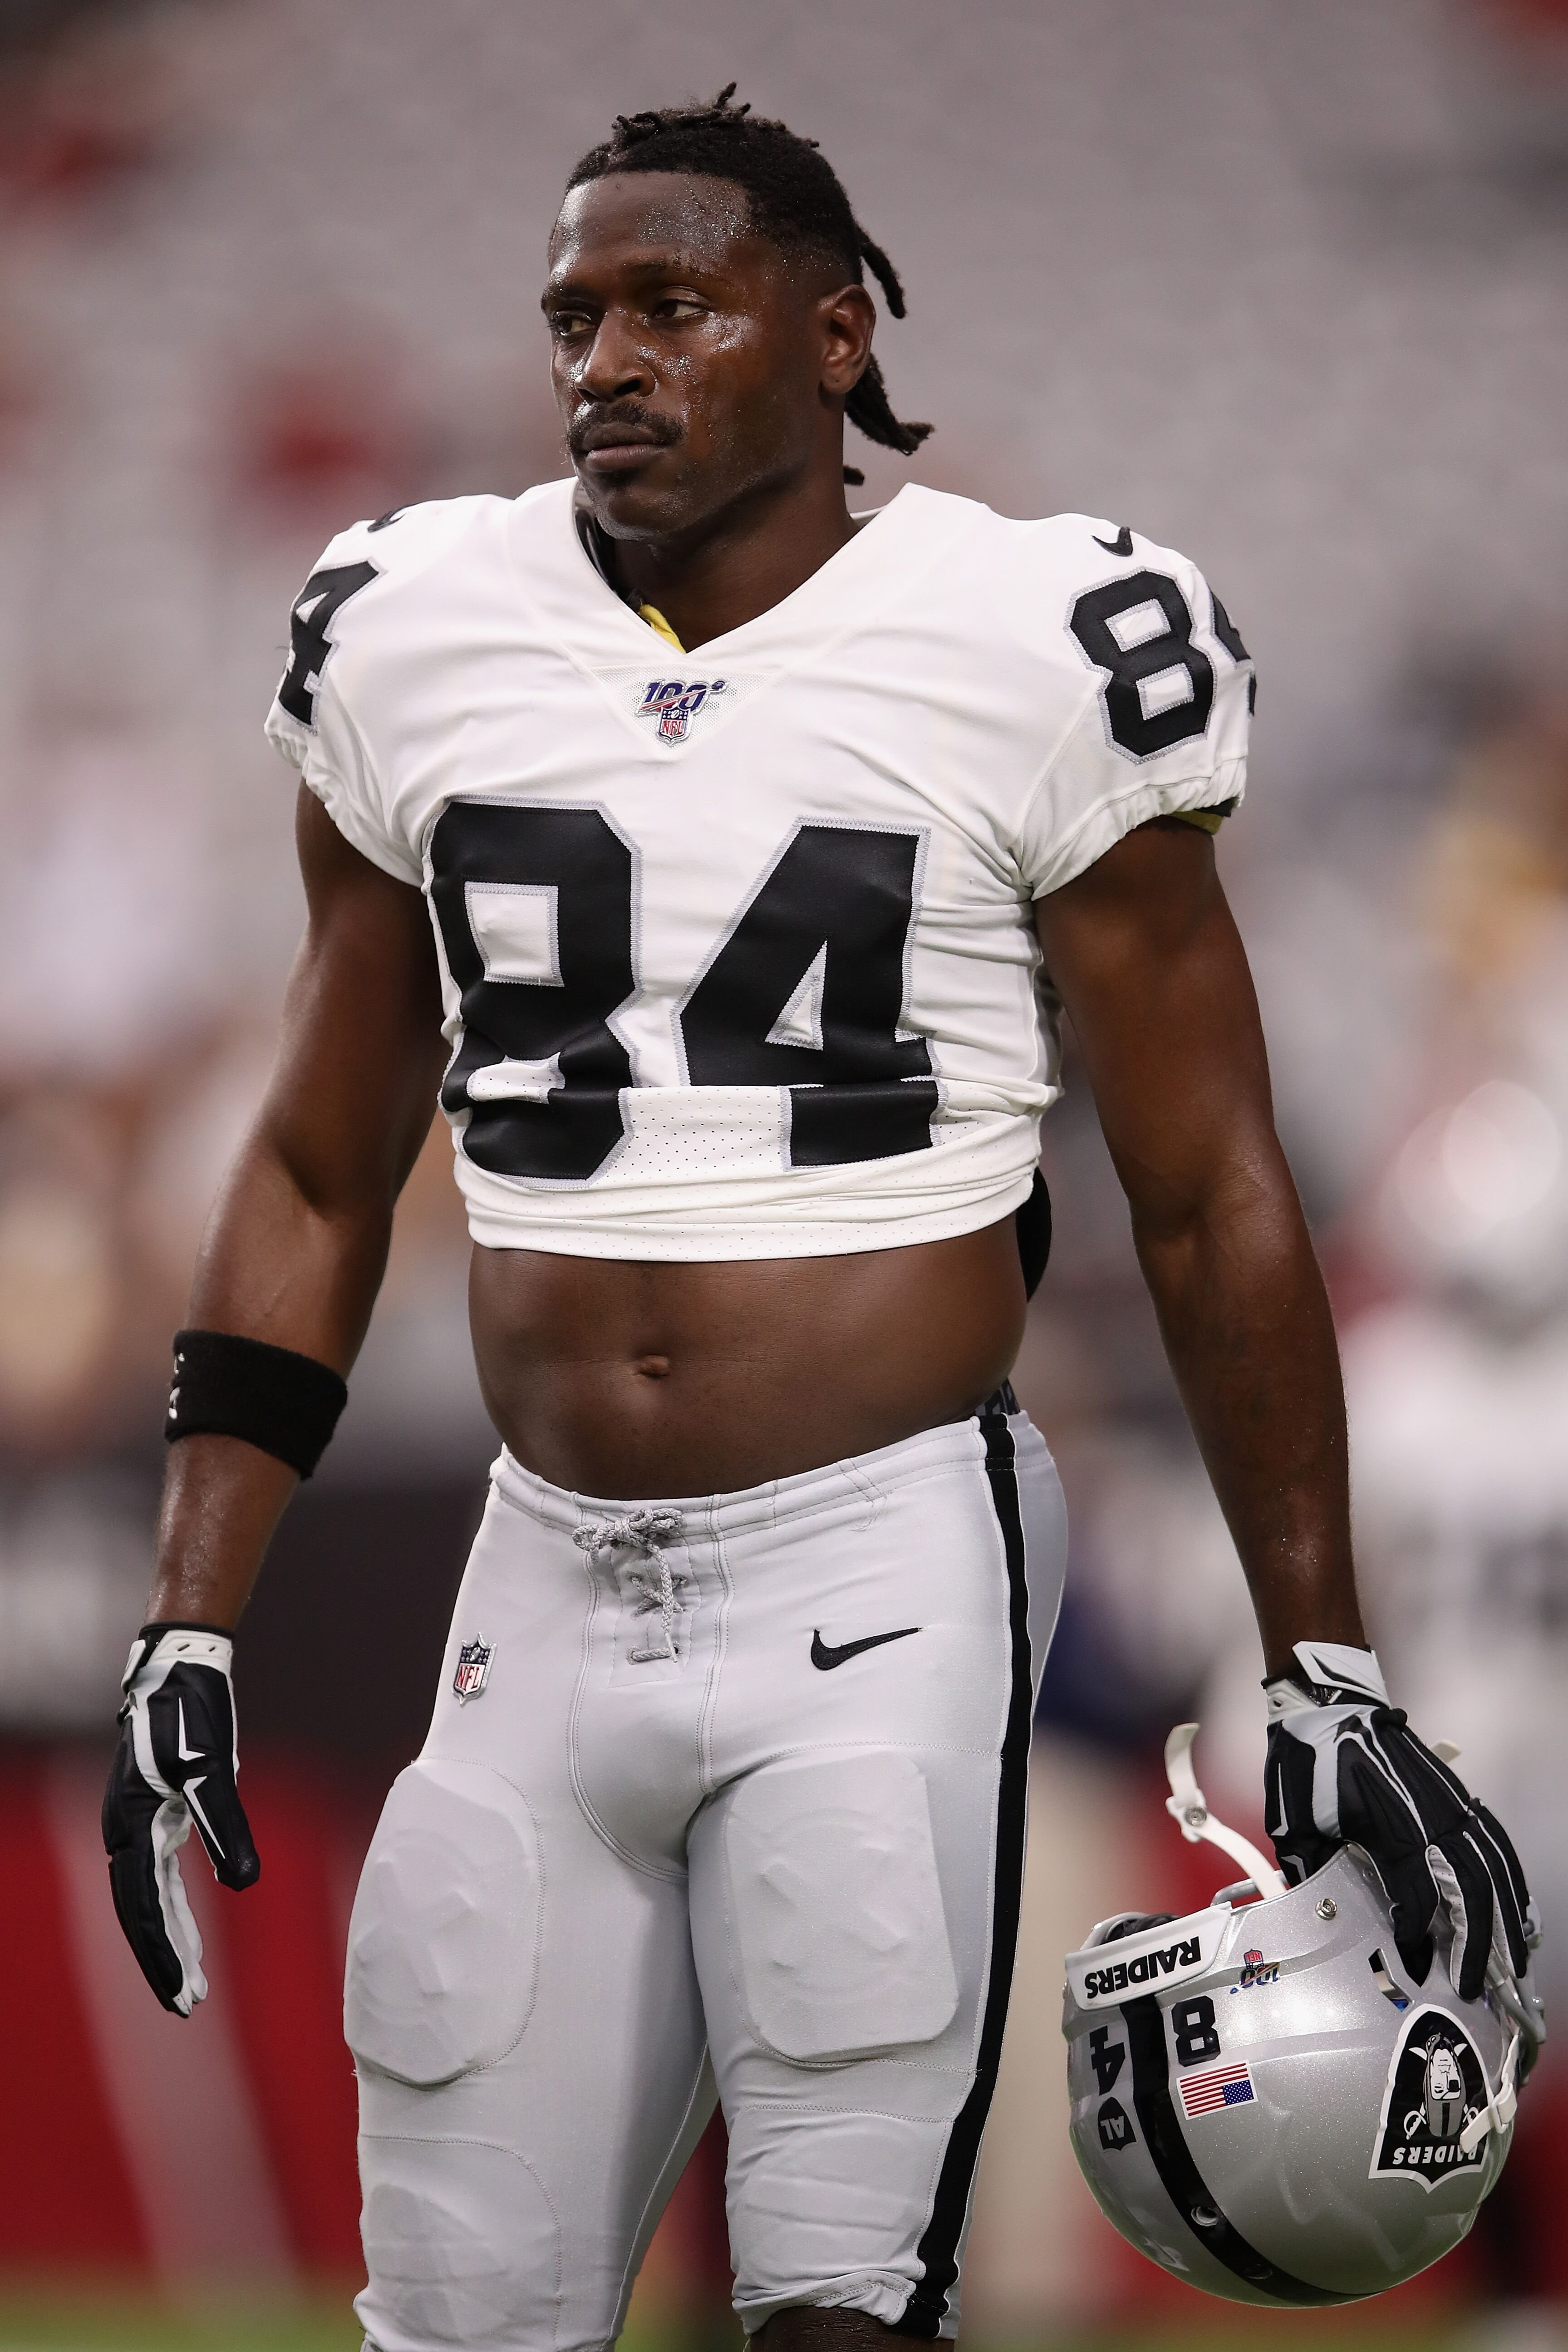  Antonio Brown at an NFL preseason game against the Arizona Cardinals in August, 2019/ Source: Getty Images